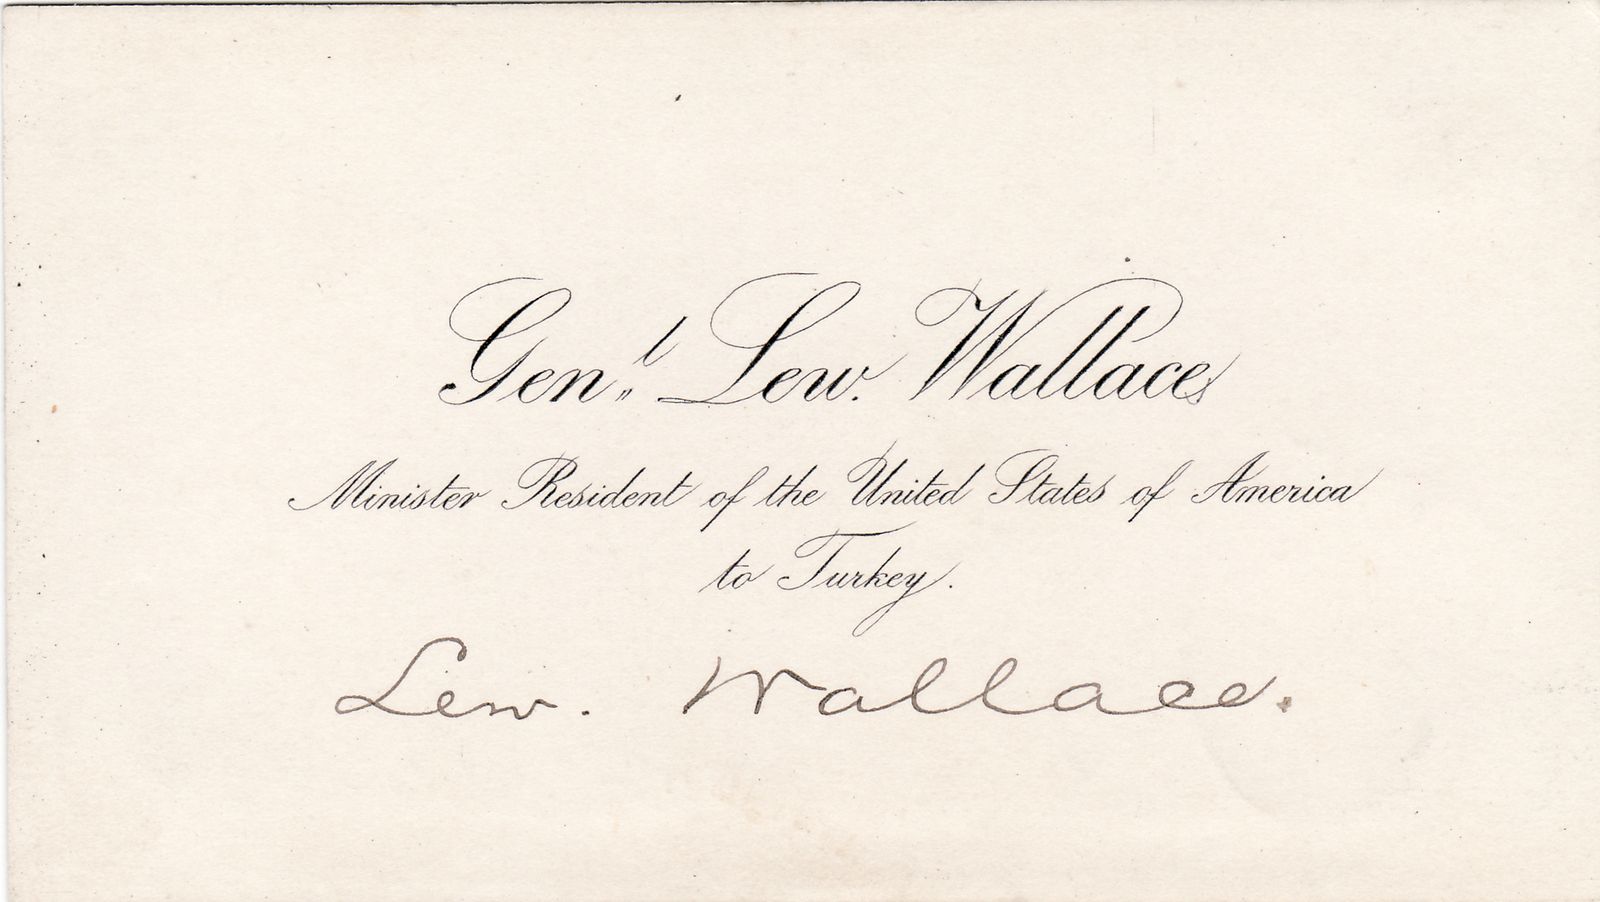 Lew Wallace's Signed "Minister Resident of the United States of America to Turkey" Calling Card